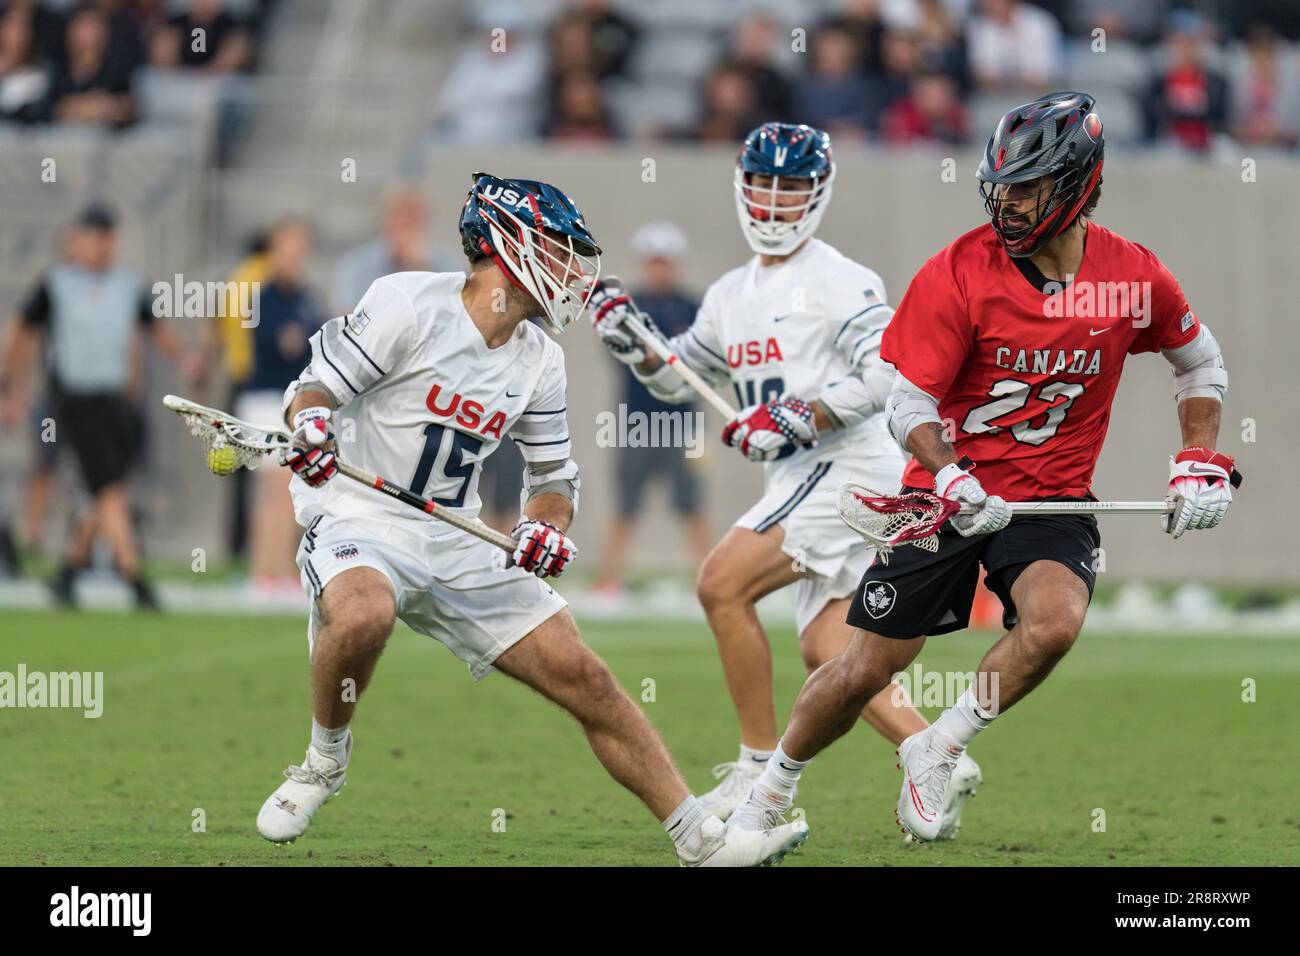 San Diego, USA. 21st June, 2023. Ryan Conrad (15) of USA against Challen Rogers (23) of Canada at the World Lacrosse Men's Championship opening game USA vs Canada at Snapdragon Stadium. Credit: Ben Nichols/Alamy Live News Stock Photo